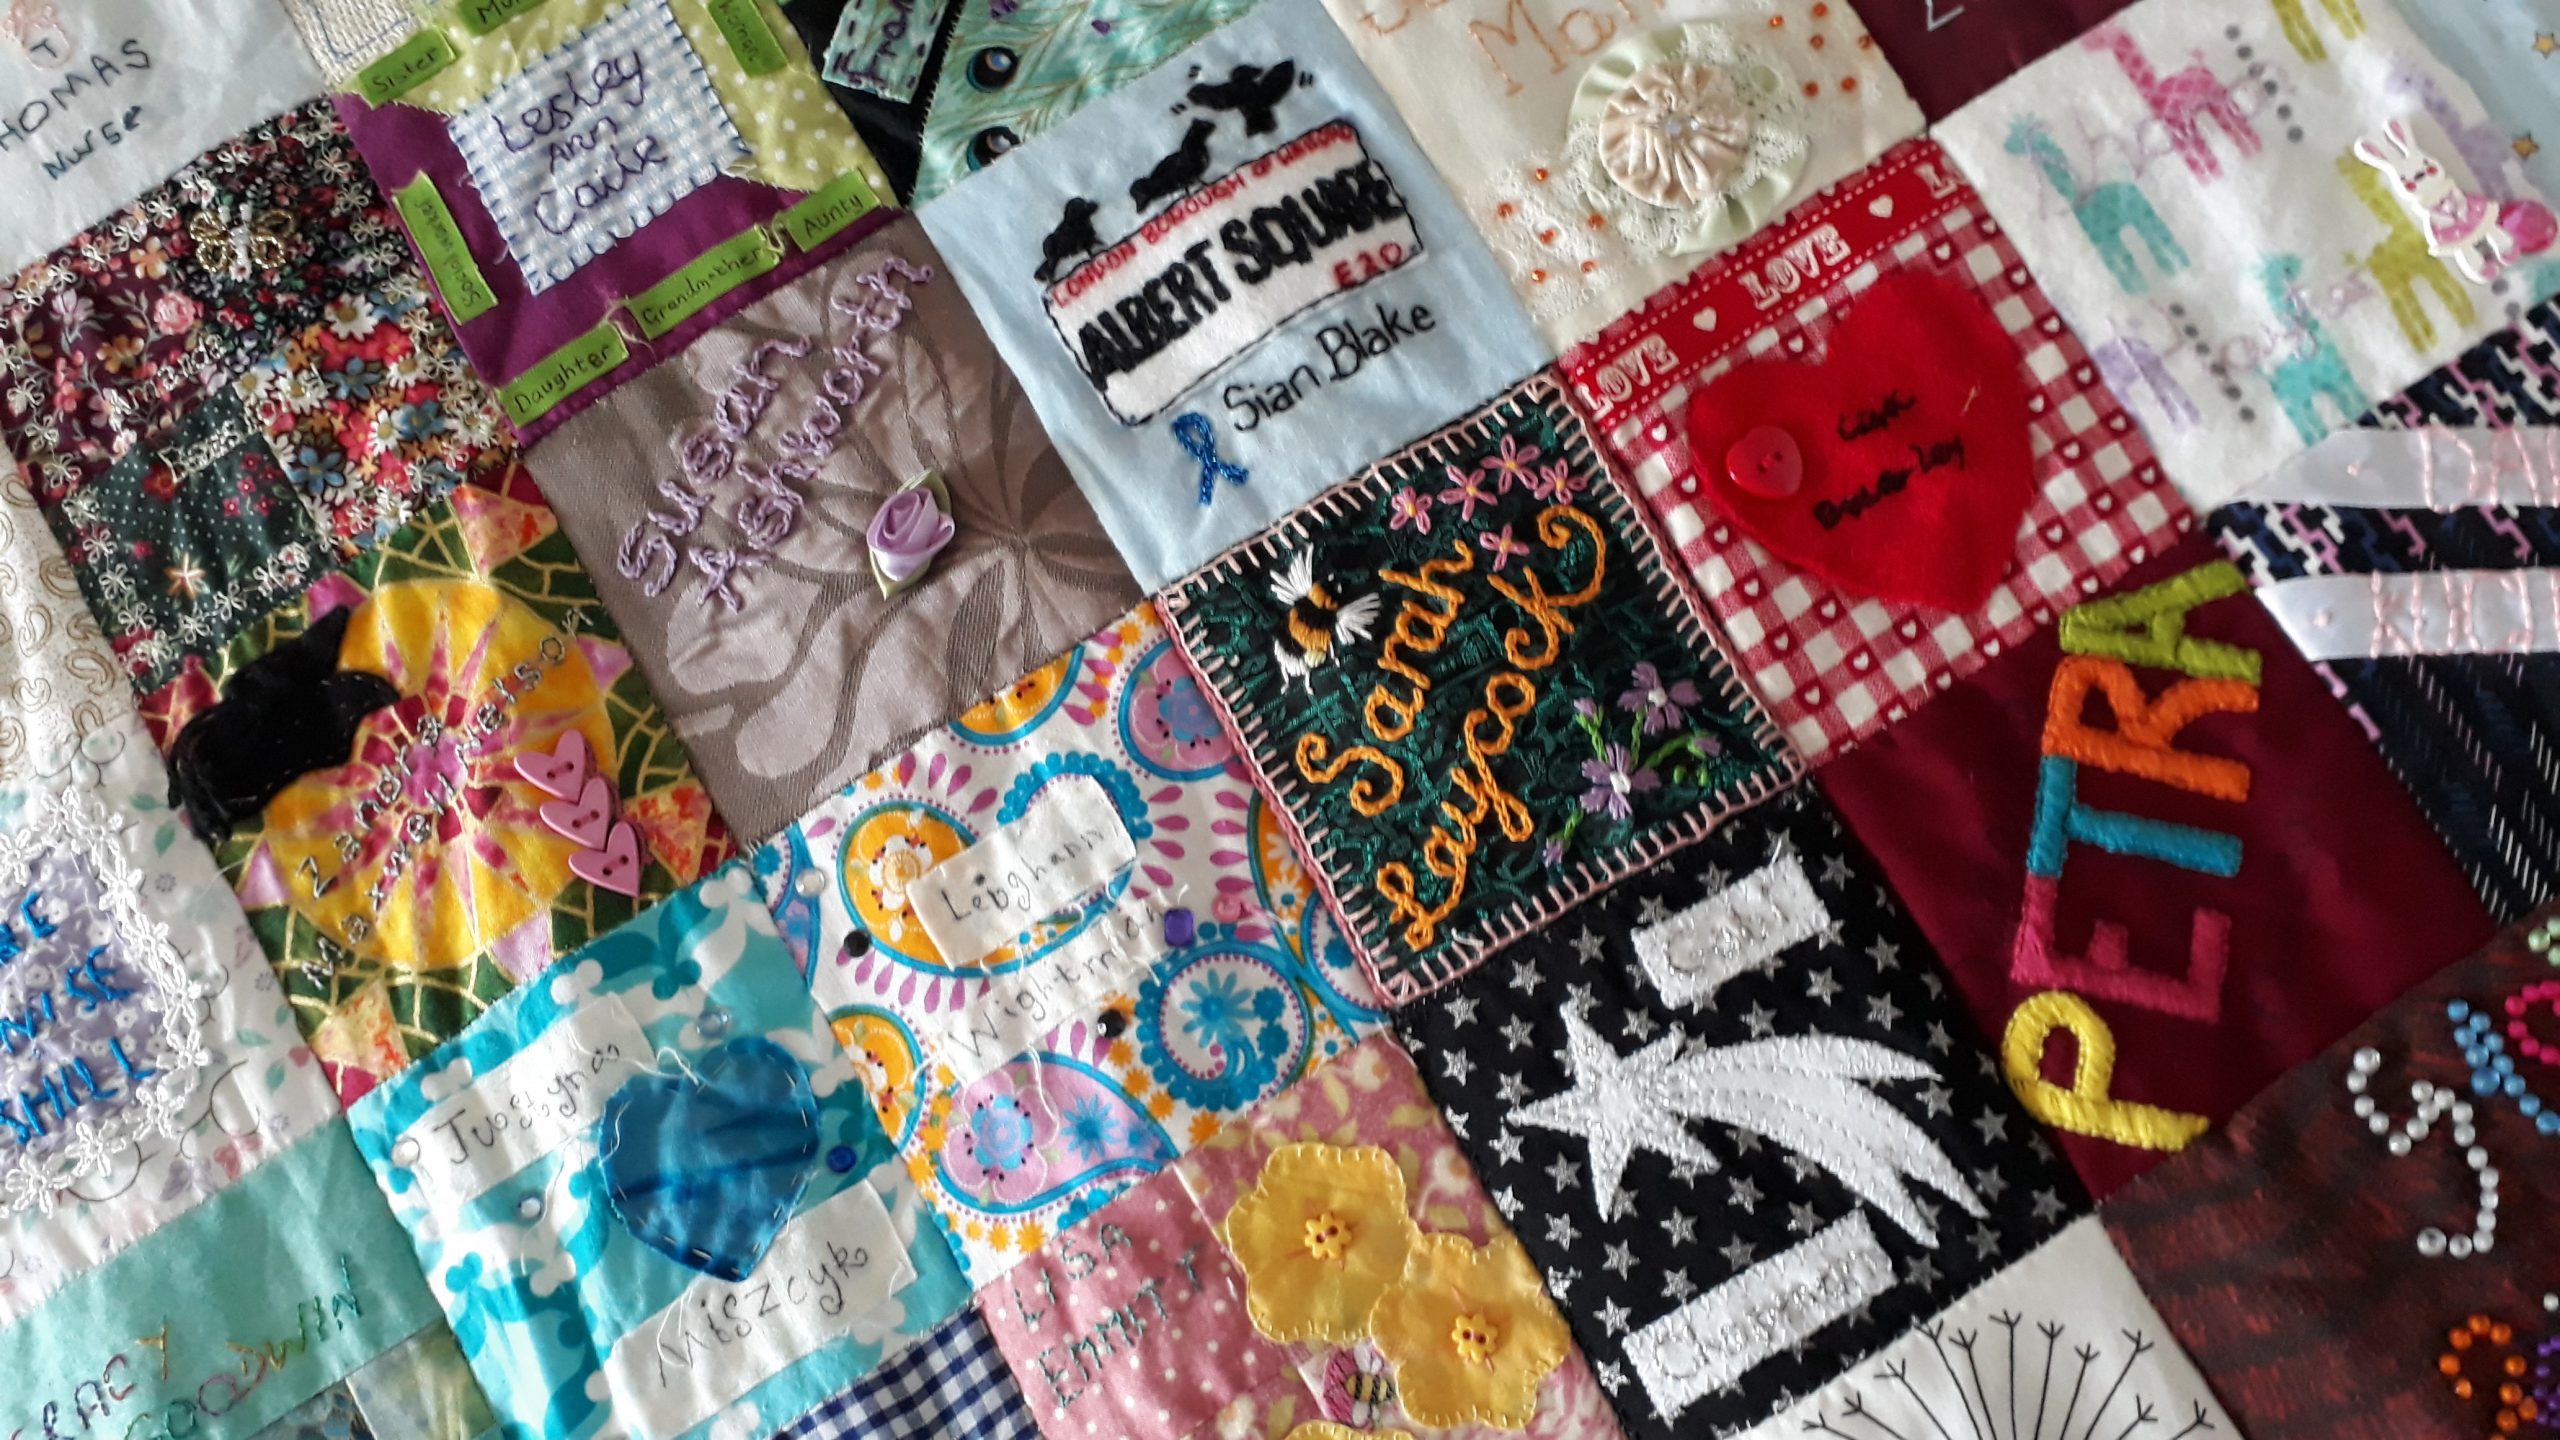 National Trust welcomes ‘The Women’s Quilt’ to The Workhouse ...